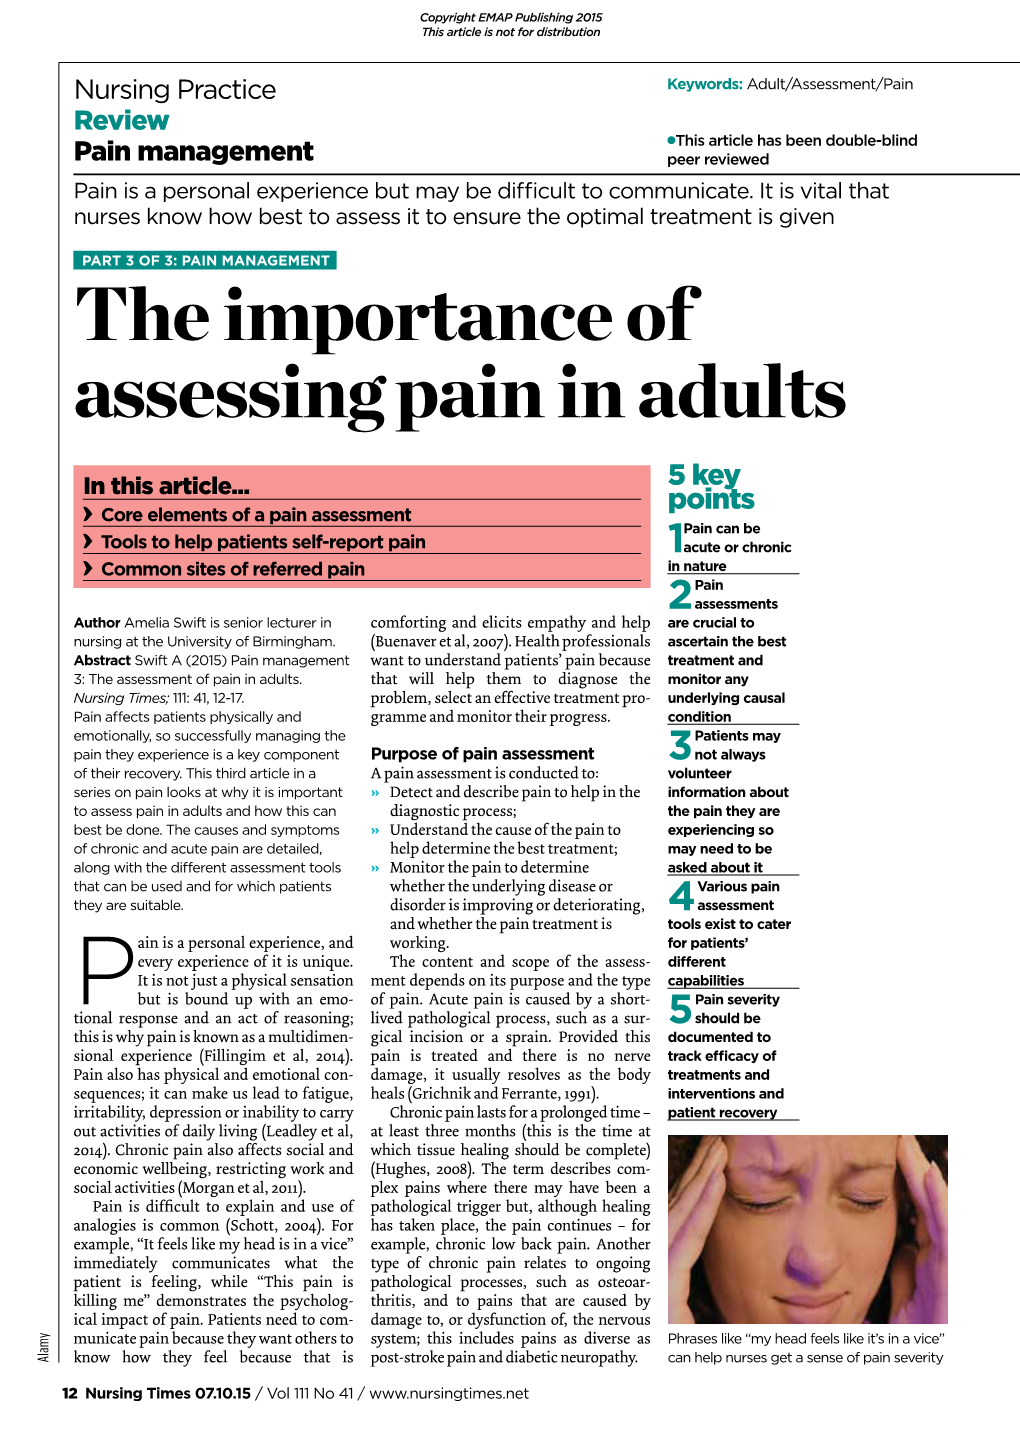 The Importance of Assessing Pain in Adults